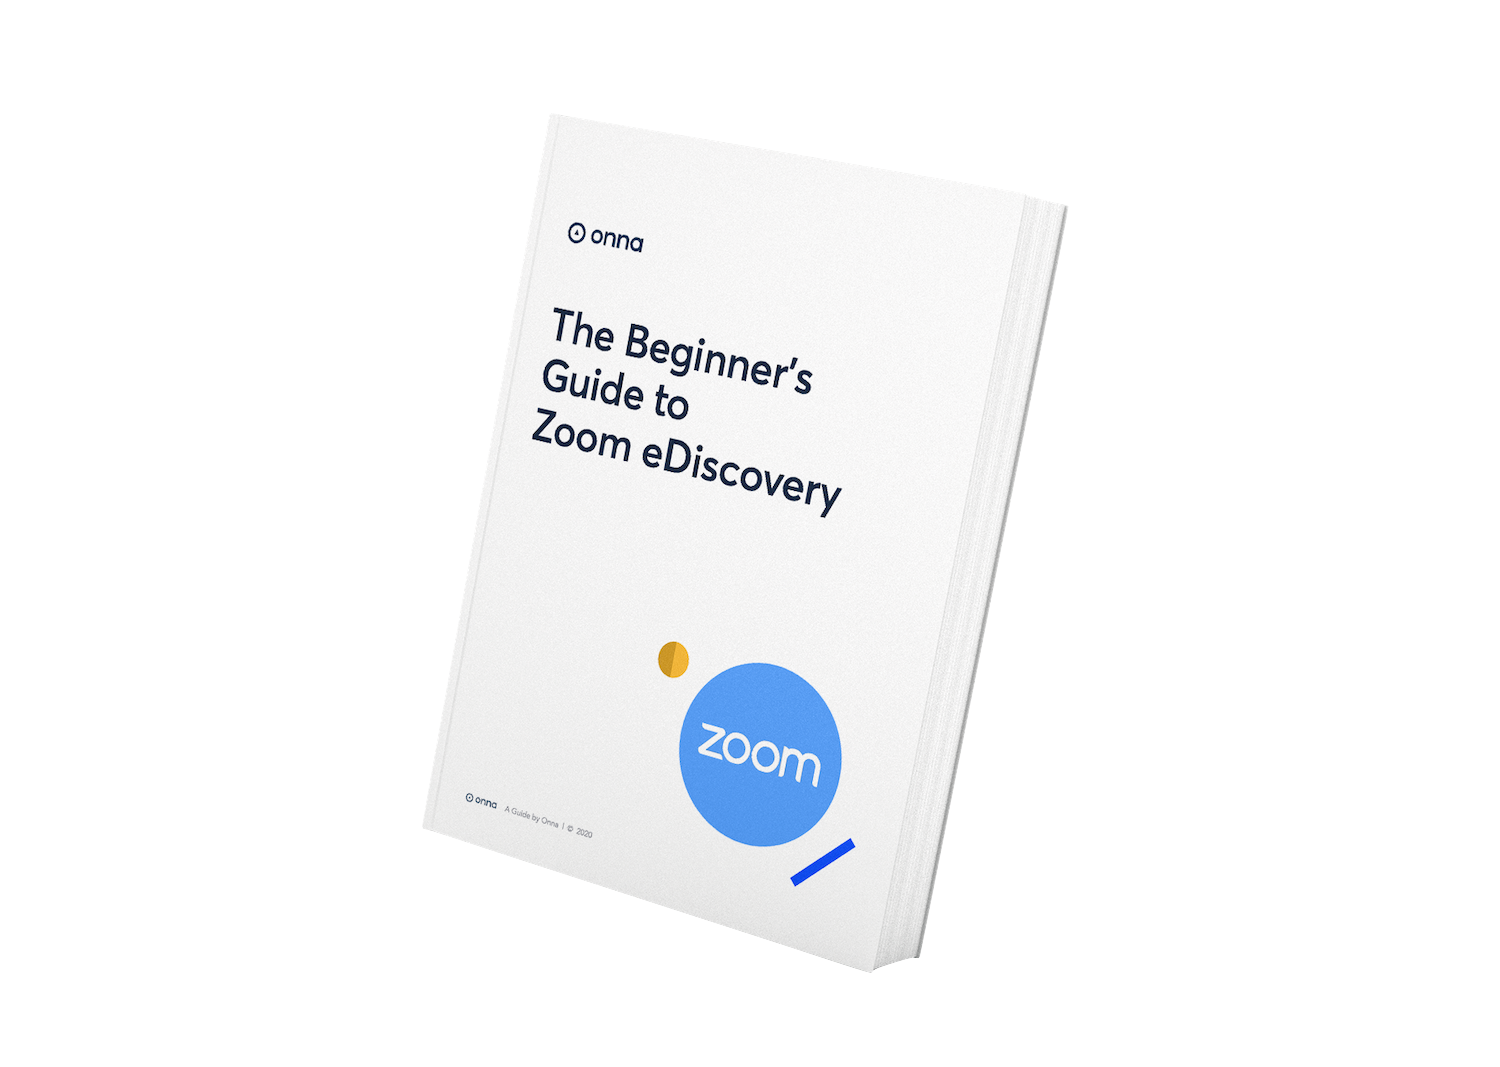 icon-zoom-ediscovery-guide